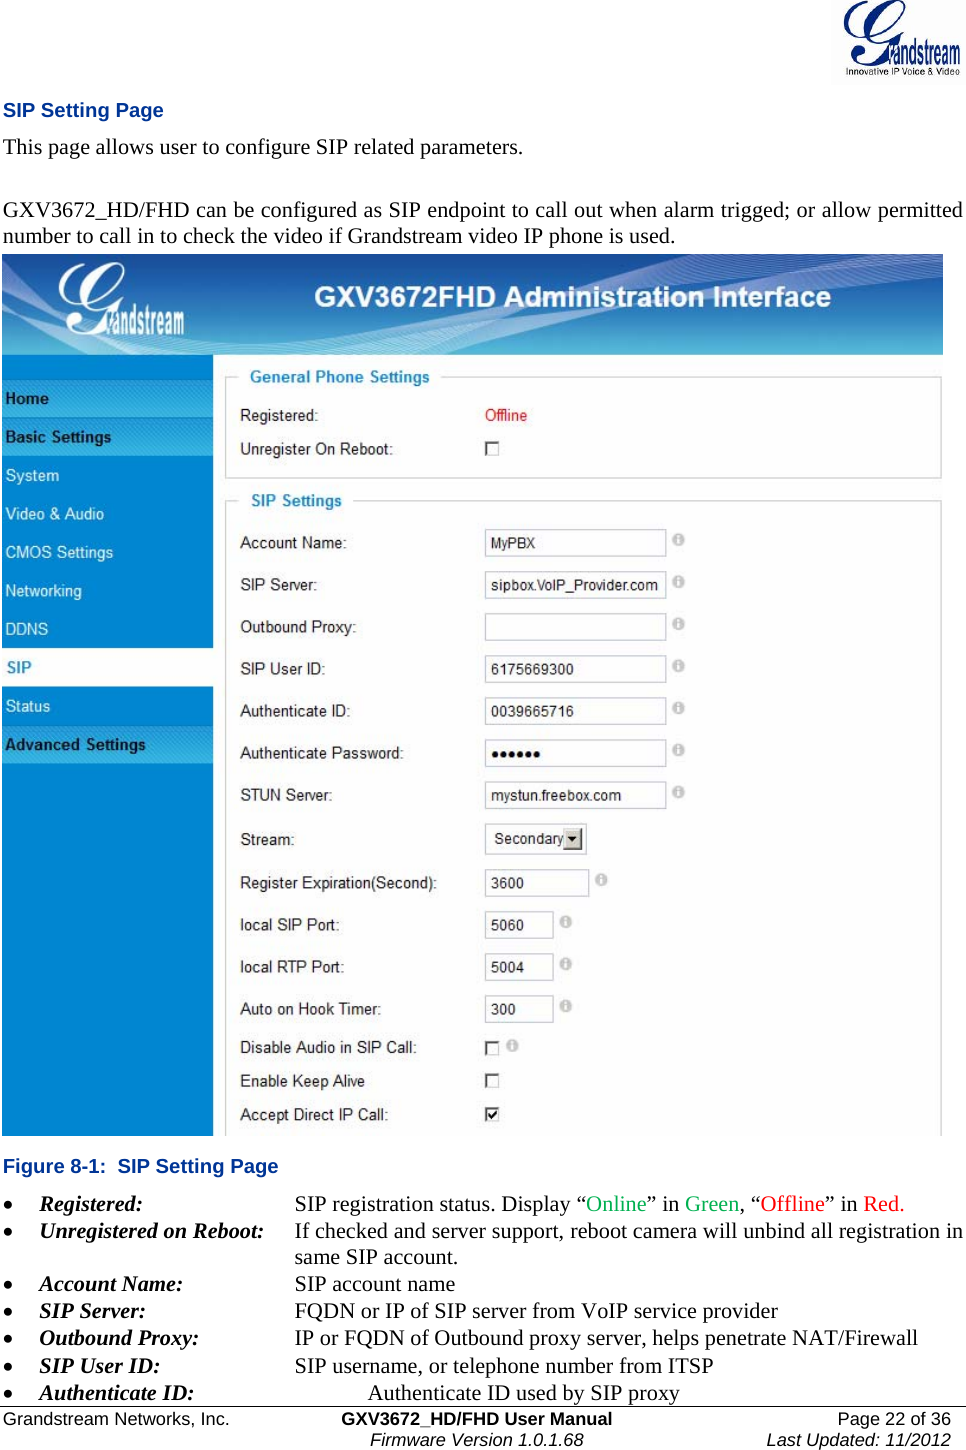  Grandstream Networks, Inc.  GXV3672_HD/FHD User Manual  Page 22 of 36    Firmware Version 1.0.1.68  Last Updated: 11/2012  SIP Setting Page This page allows user to configure SIP related parameters.   GXV3672_HD/FHD can be configured as SIP endpoint to call out when alarm trigged; or allow permitted number to call in to check the video if Grandstream video IP phone is used.   Figure 8-1:  SIP Setting Page • Registered:      SIP registration status. Display “Online” in Green, “Offline” in Red.  • Unregistered on Reboot:   If checked and server support, reboot camera will unbind all registration in     same SIP account. • Account Name:     SIP account name • SIP Server:     FQDN or IP of SIP server from VoIP service provider • Outbound Proxy:     IP or FQDN of Outbound proxy server, helps penetrate NAT/Firewall  • SIP User ID:     SIP username, or telephone number from ITSP • Authenticate ID:       Authenticate ID used by SIP proxy 